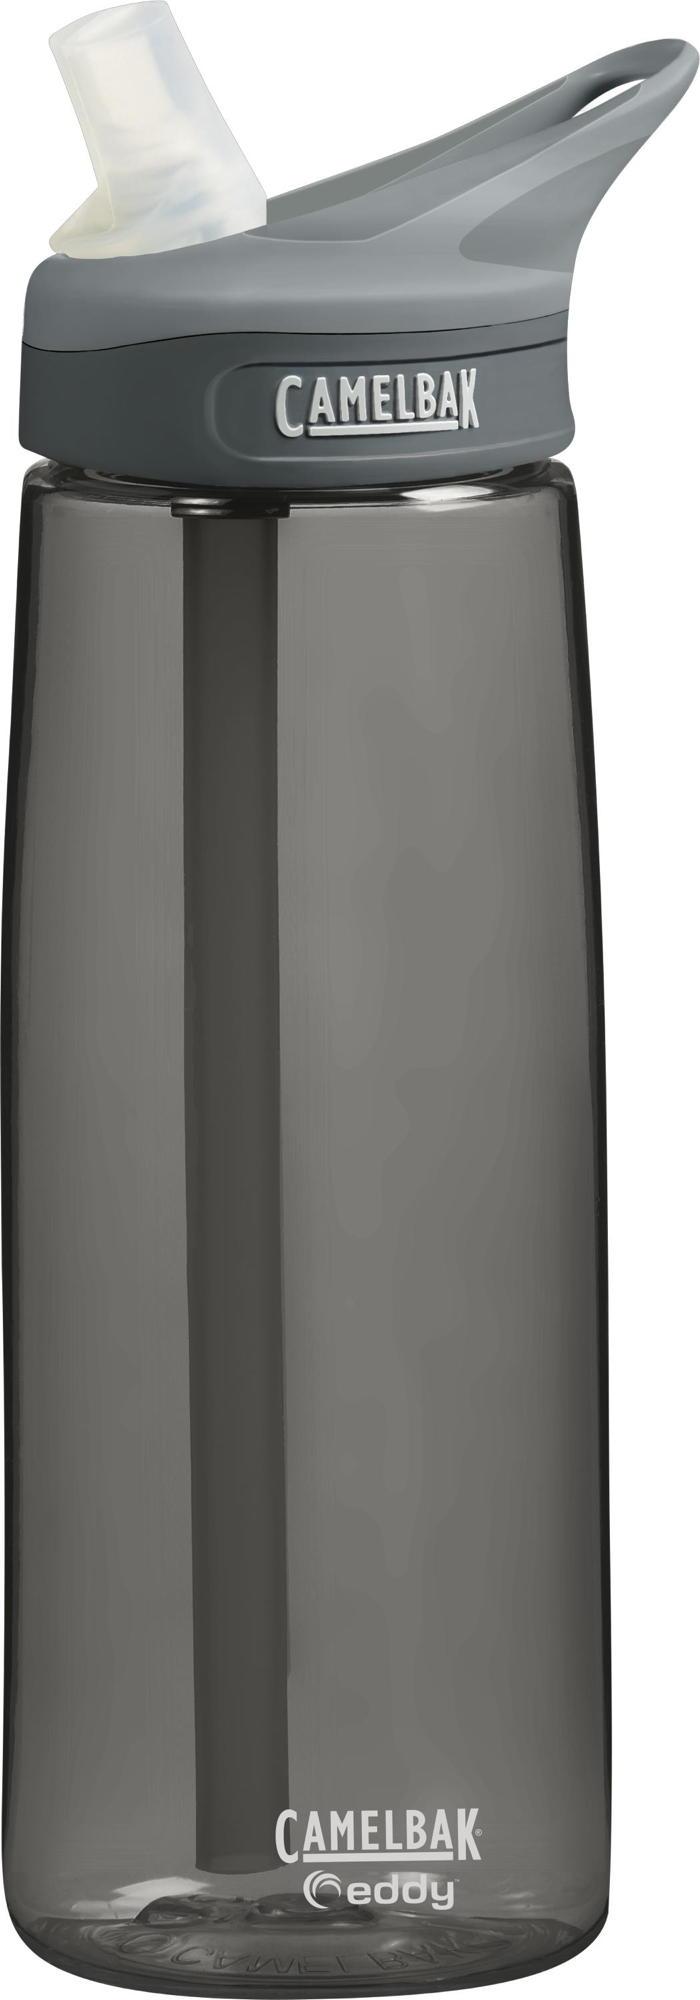 Supplies - Provisions - Drinking Tools - Camelbak Eddy .75L / 25oz Water Bottle